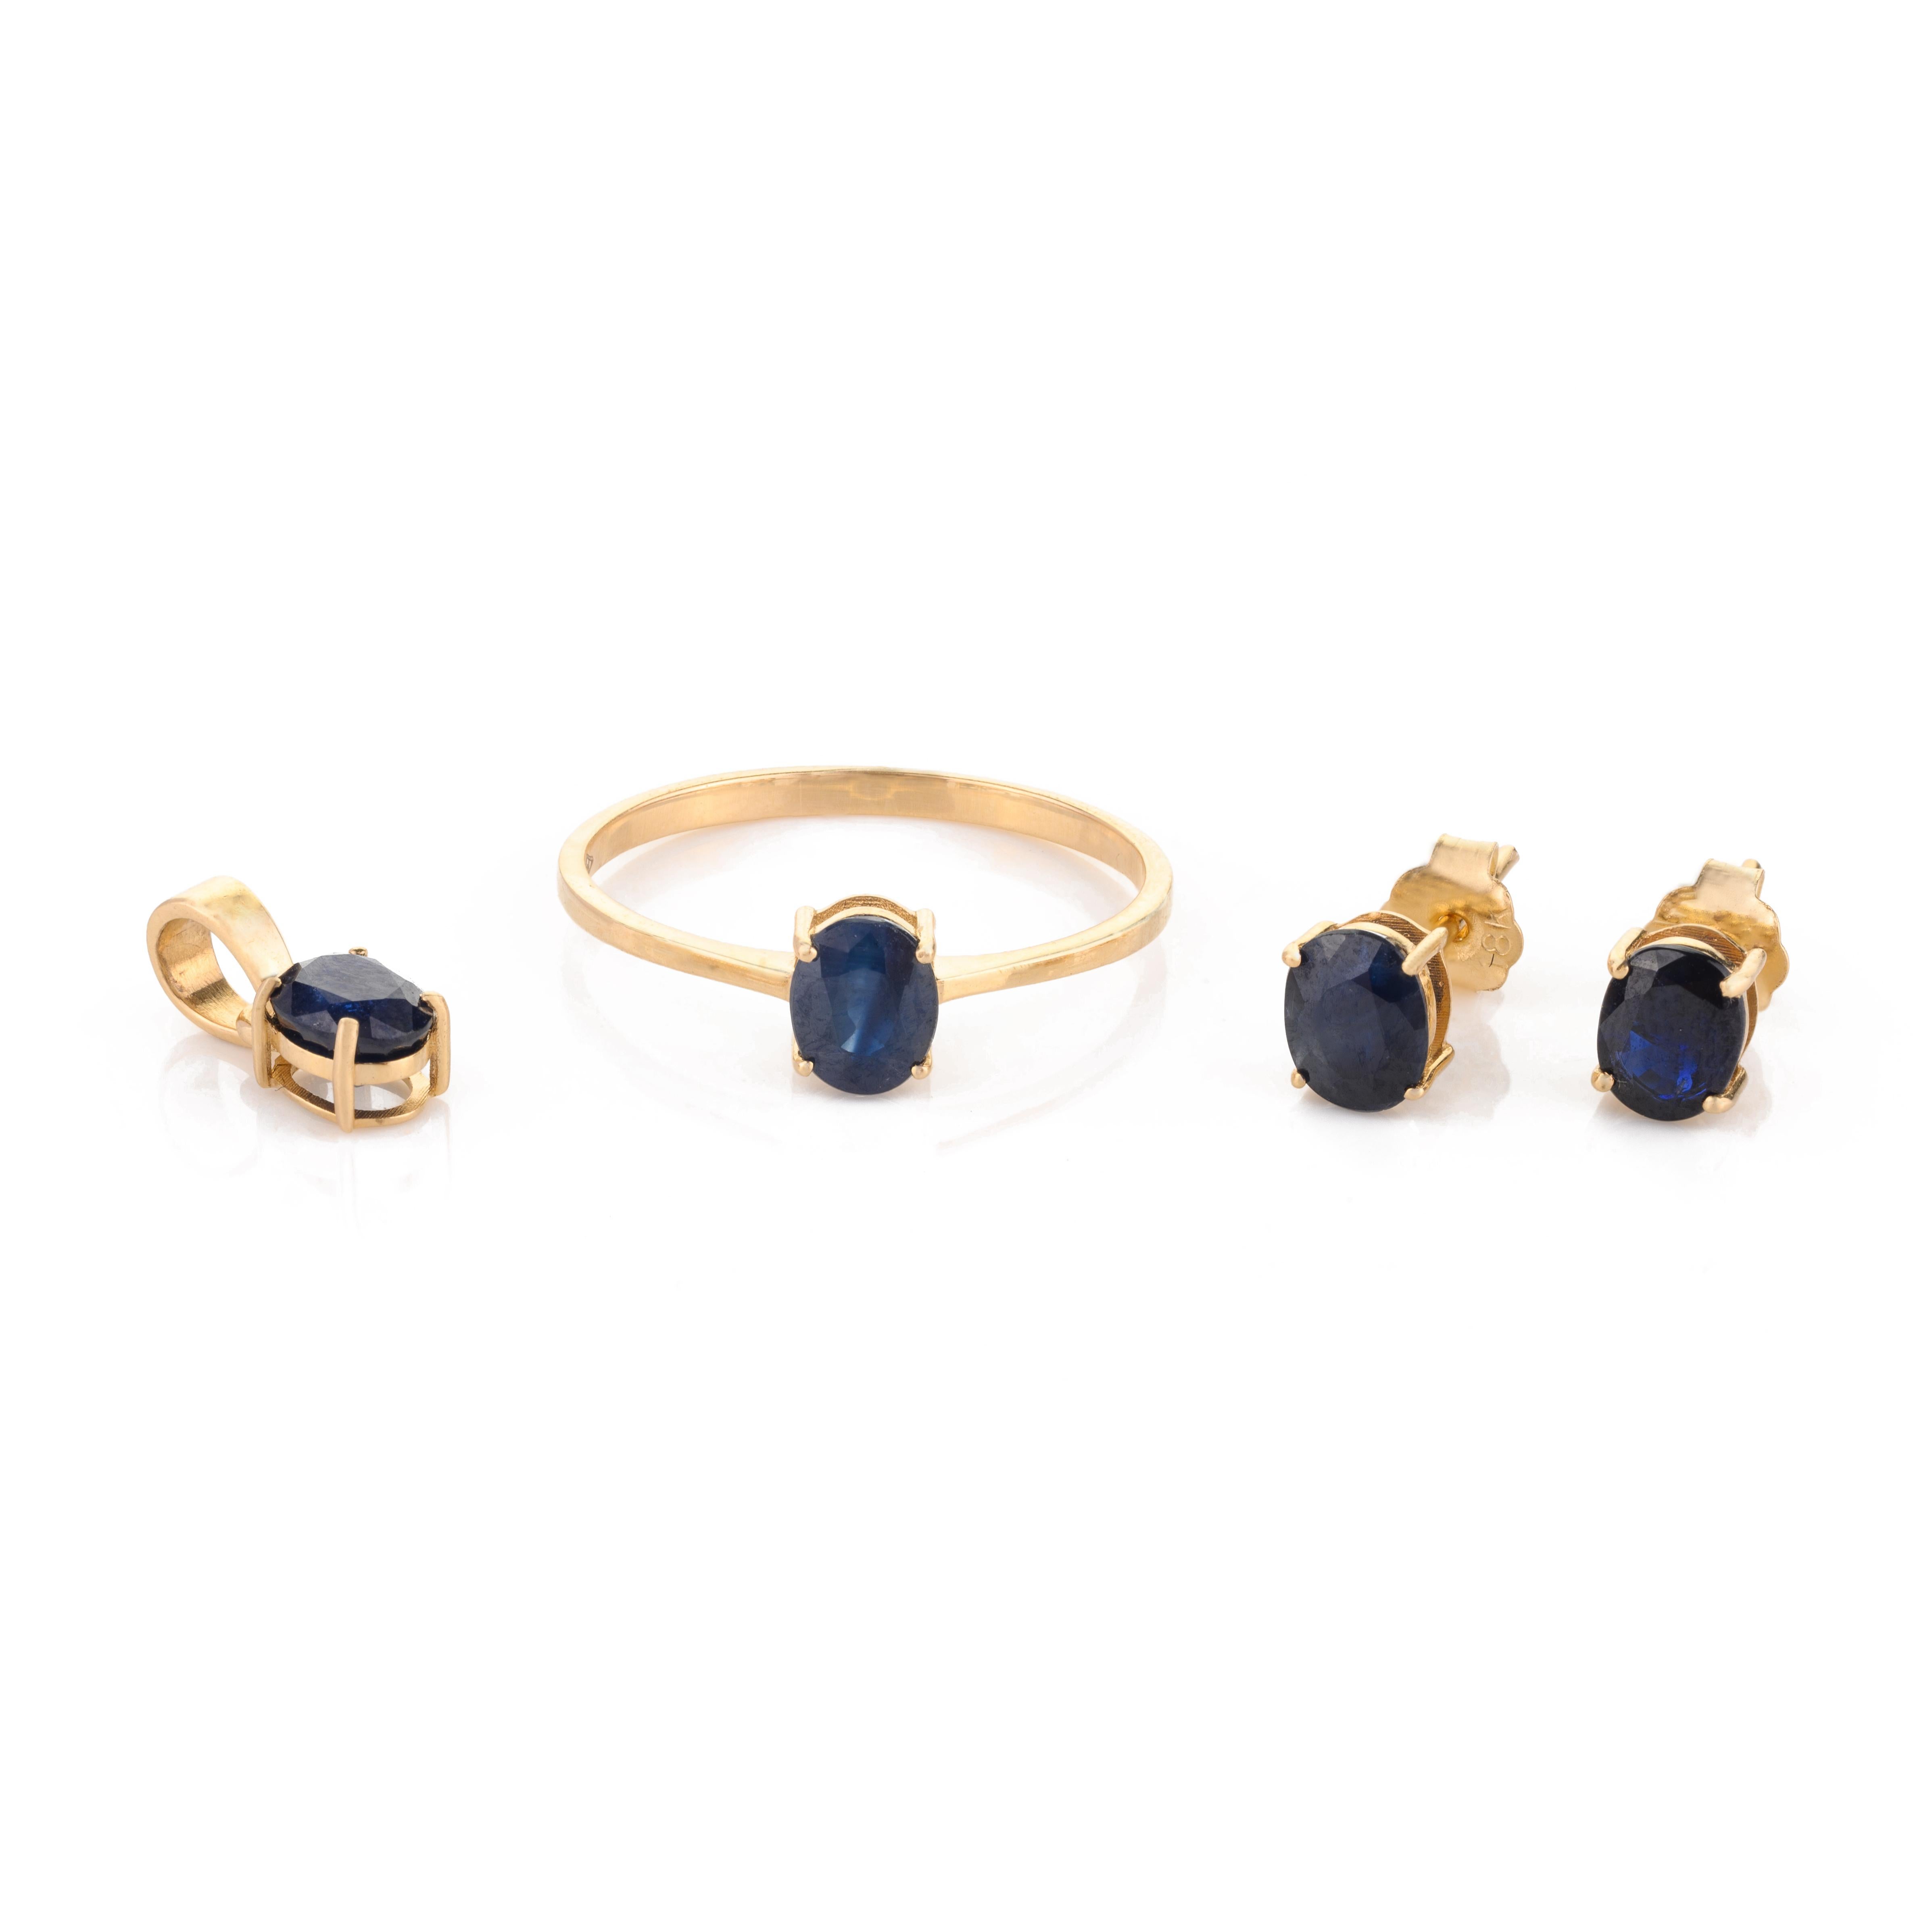 Blue Sapphire Ring, Pendant and Earrings Jewelry Set Made in 18k Yellow Gold For Sale 2